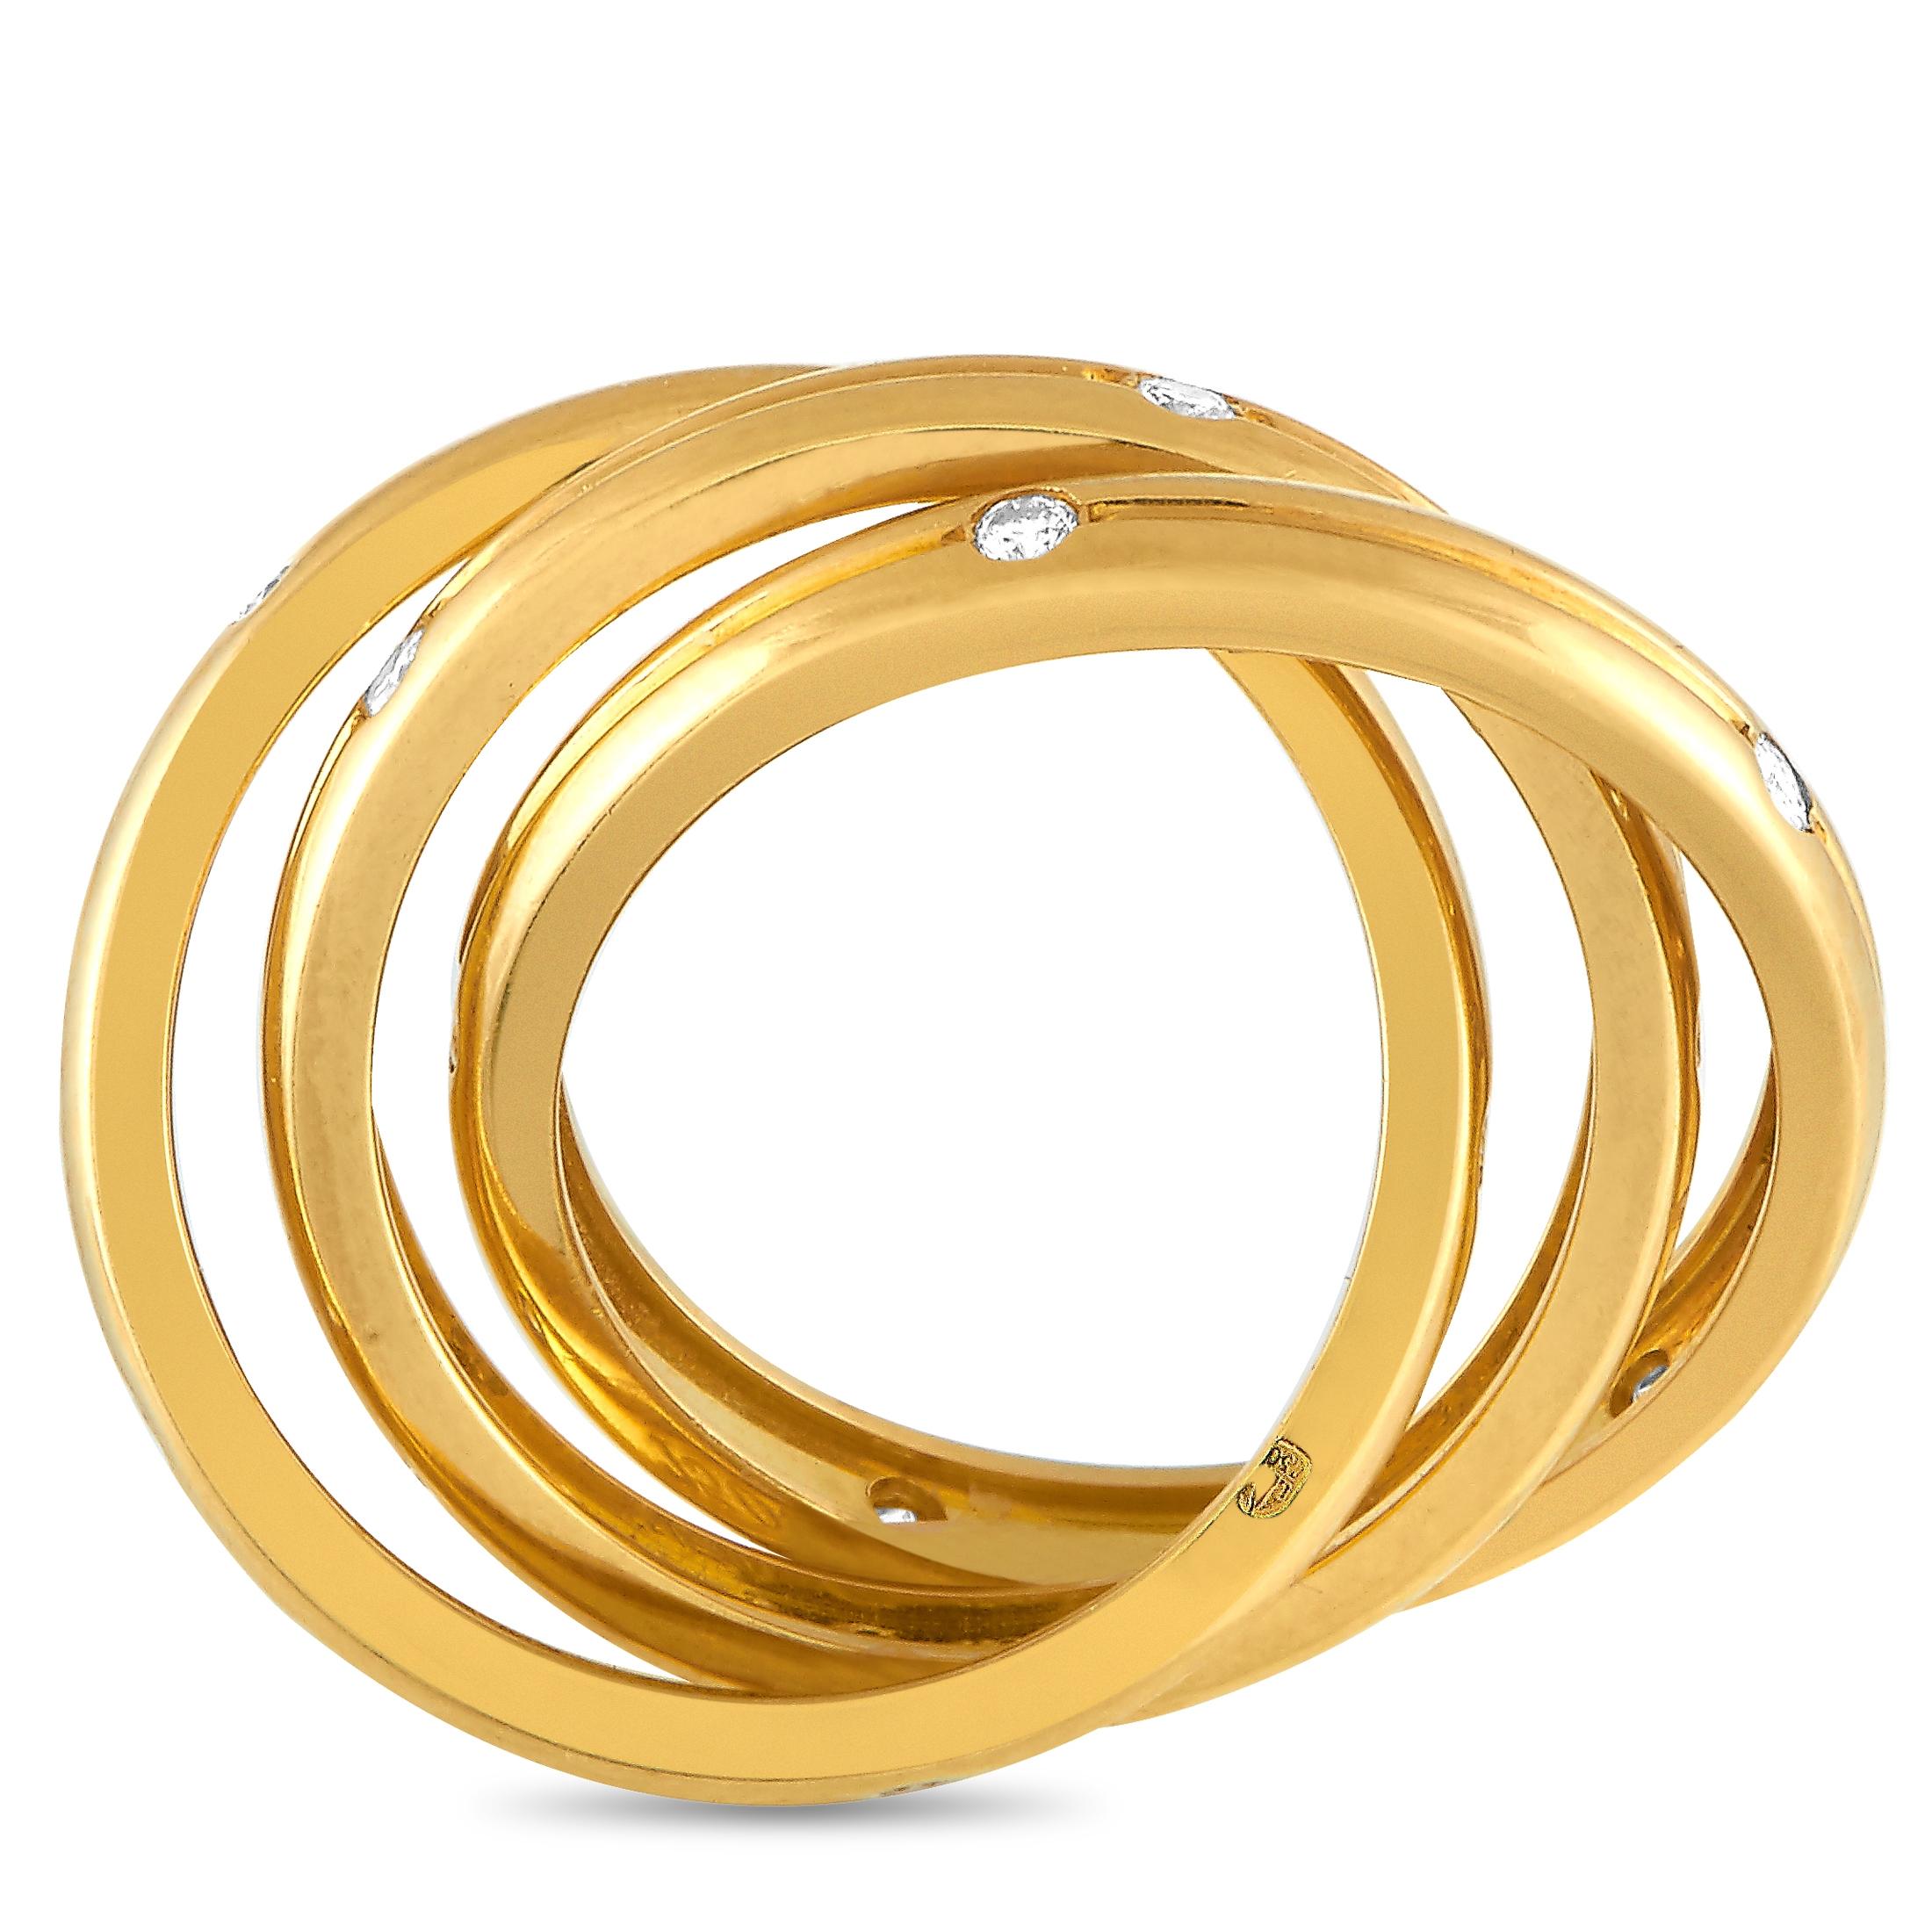 This beautiful vintage ring from Cartier is from the brand's discontinued Constellation Collection. It features a trio of interlocking yellow-gold rings, with each band detailed with a ridged channel. Each ring is also punctuated by flush-set